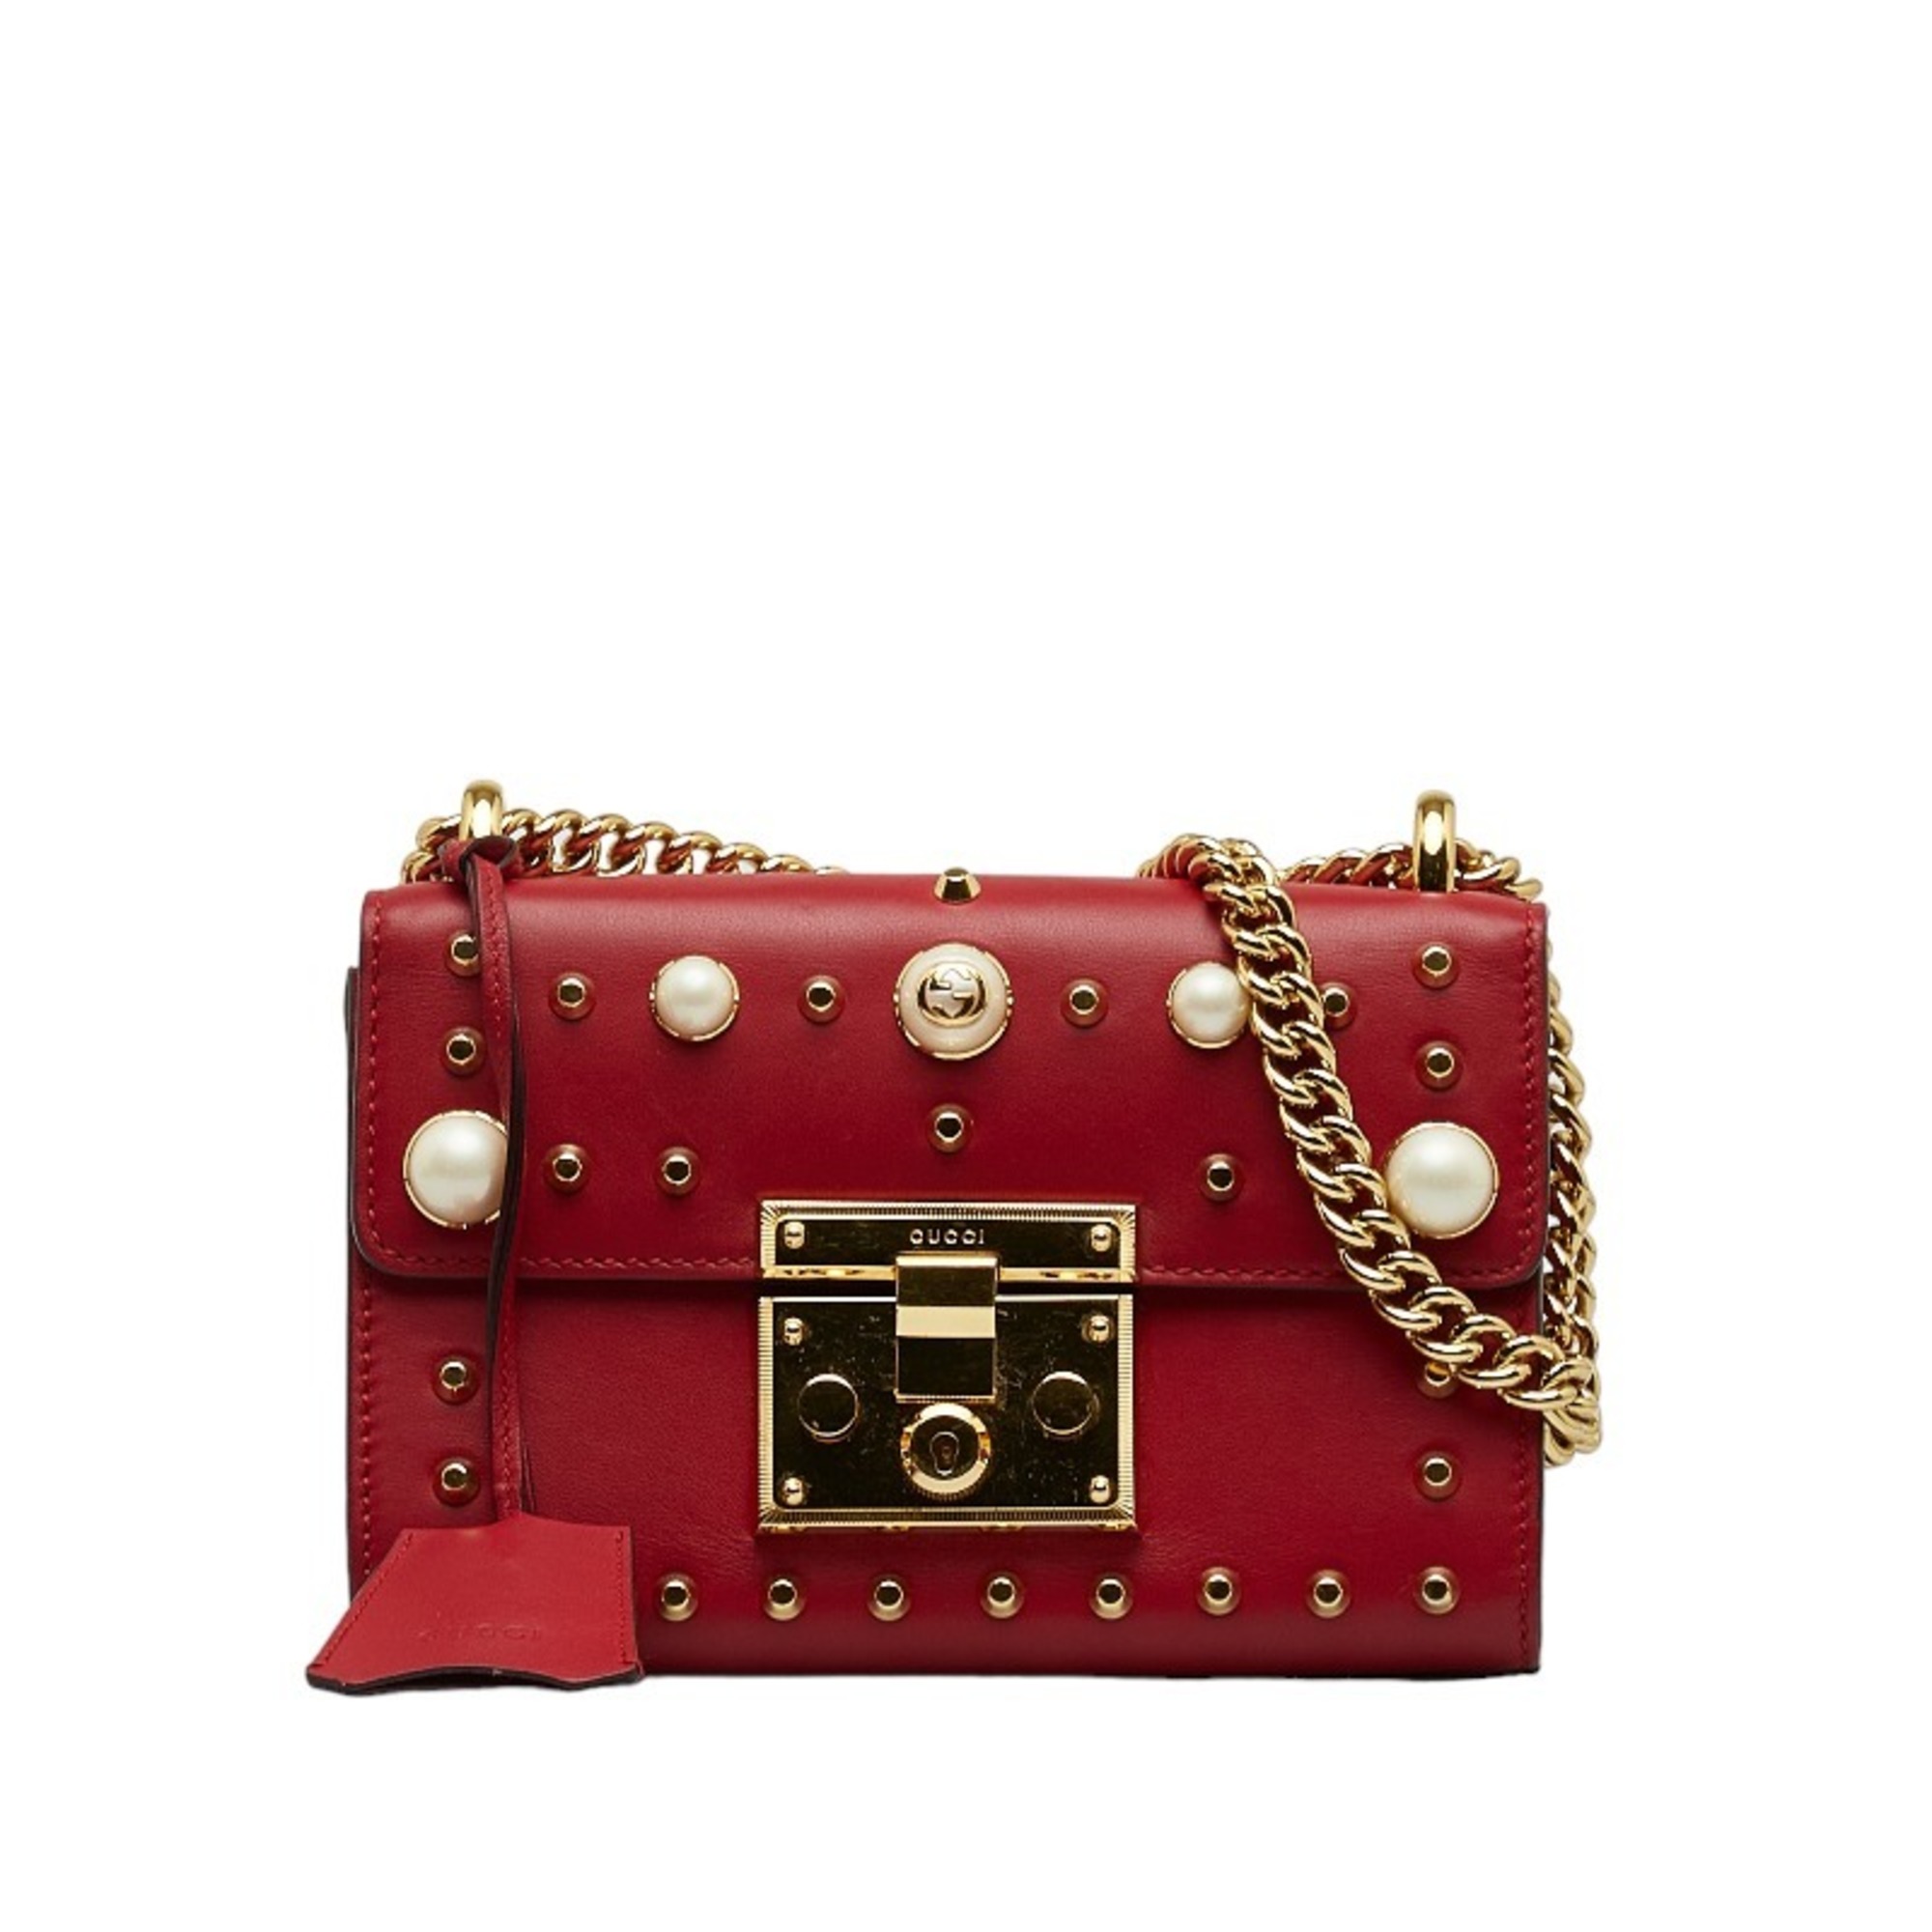 Gucci Paddock Studded Faux Pearl Chain Shoulder Bag 432182 Red Leather Women's GUCCI